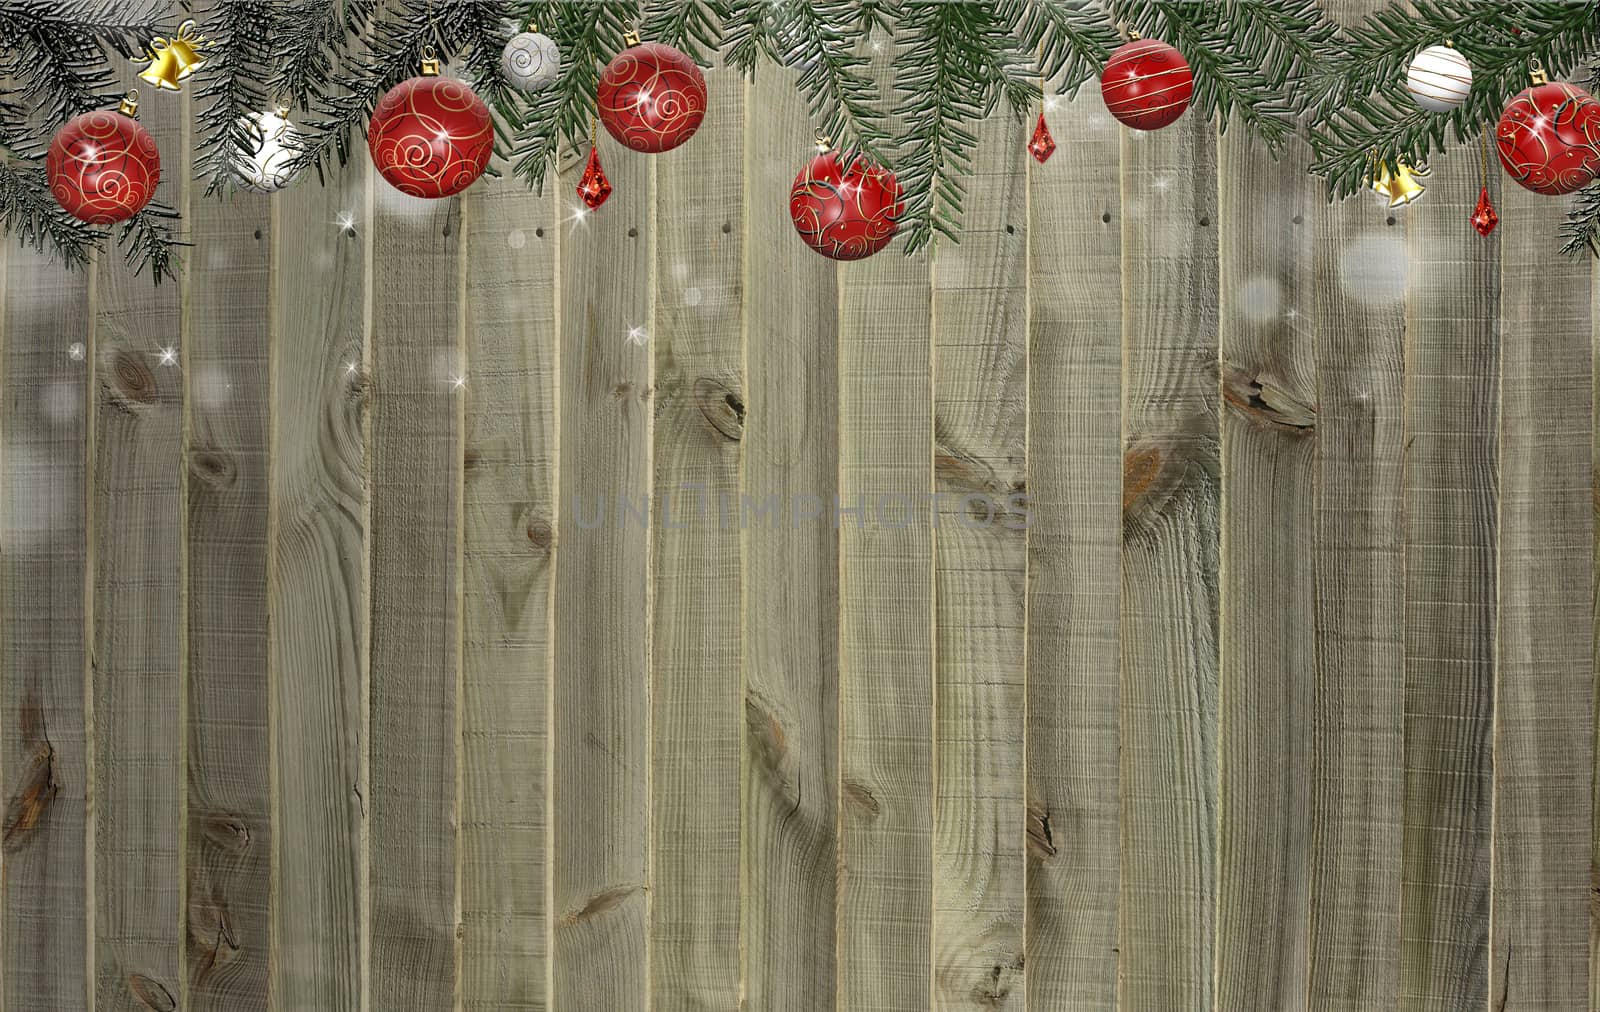 Christmas fir twigs ornamented with red baubles against wooden background by NelliPolk